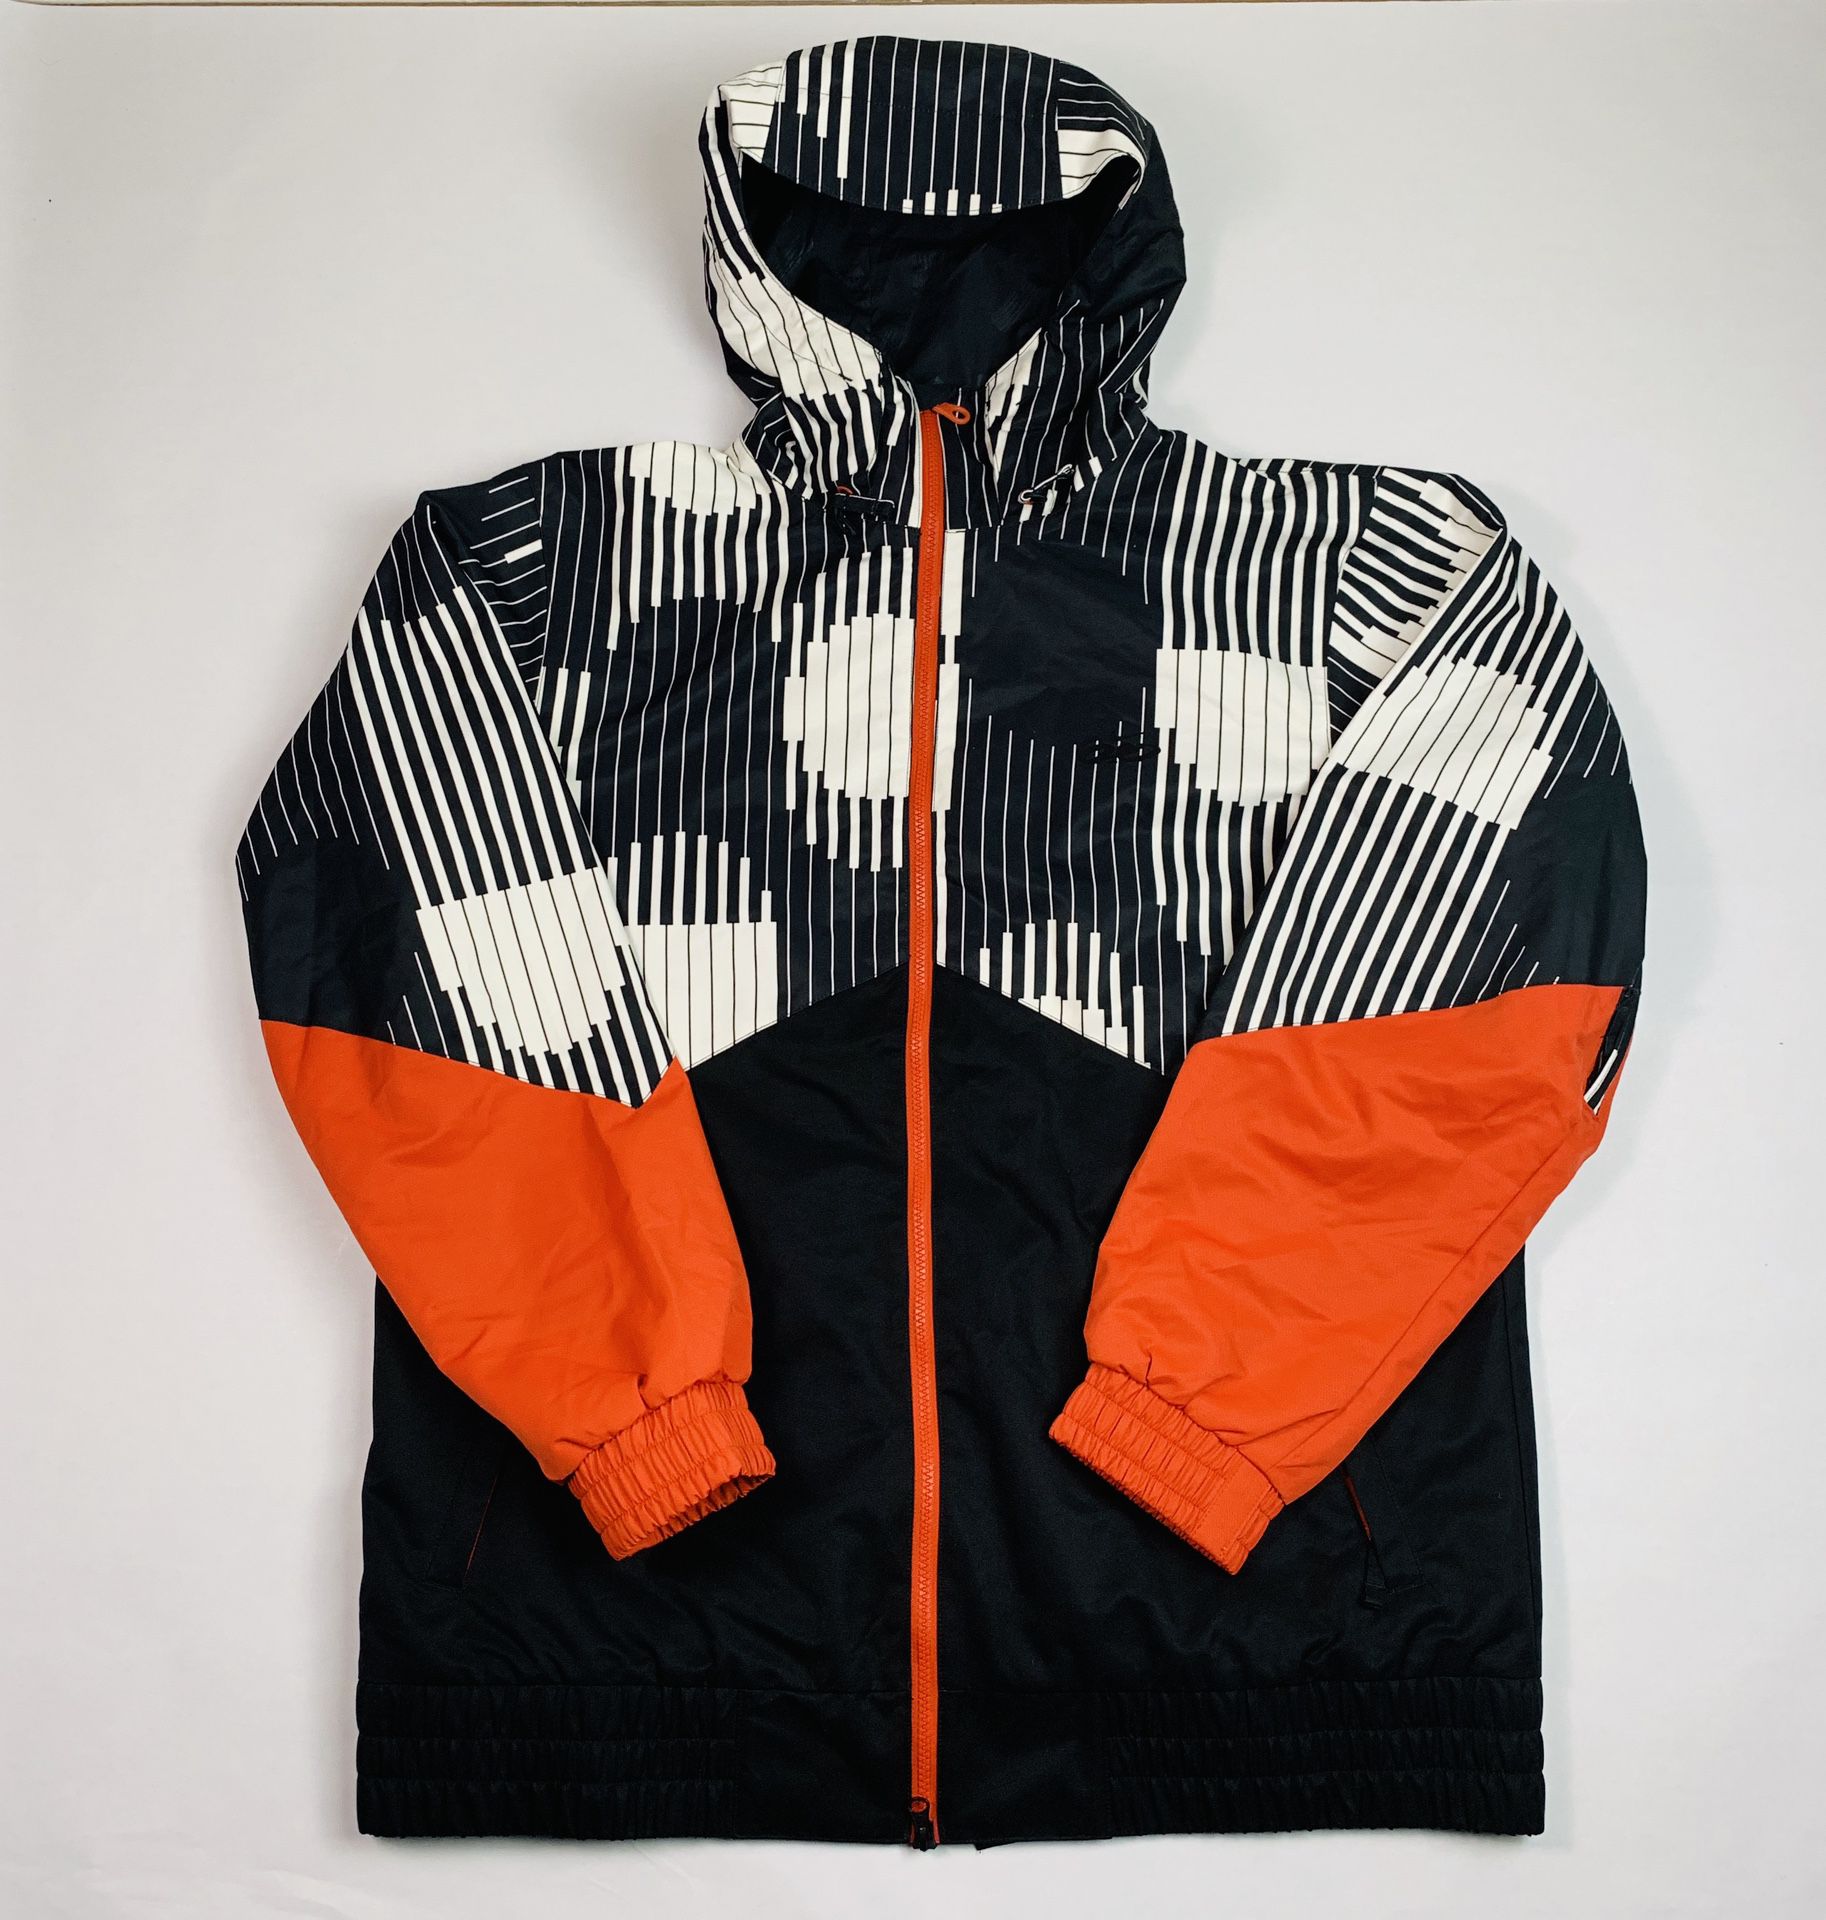 Nike SB 6.0 Snowboarding Jacket size XL Rare for Sale in Dallas, TX - OfferUp